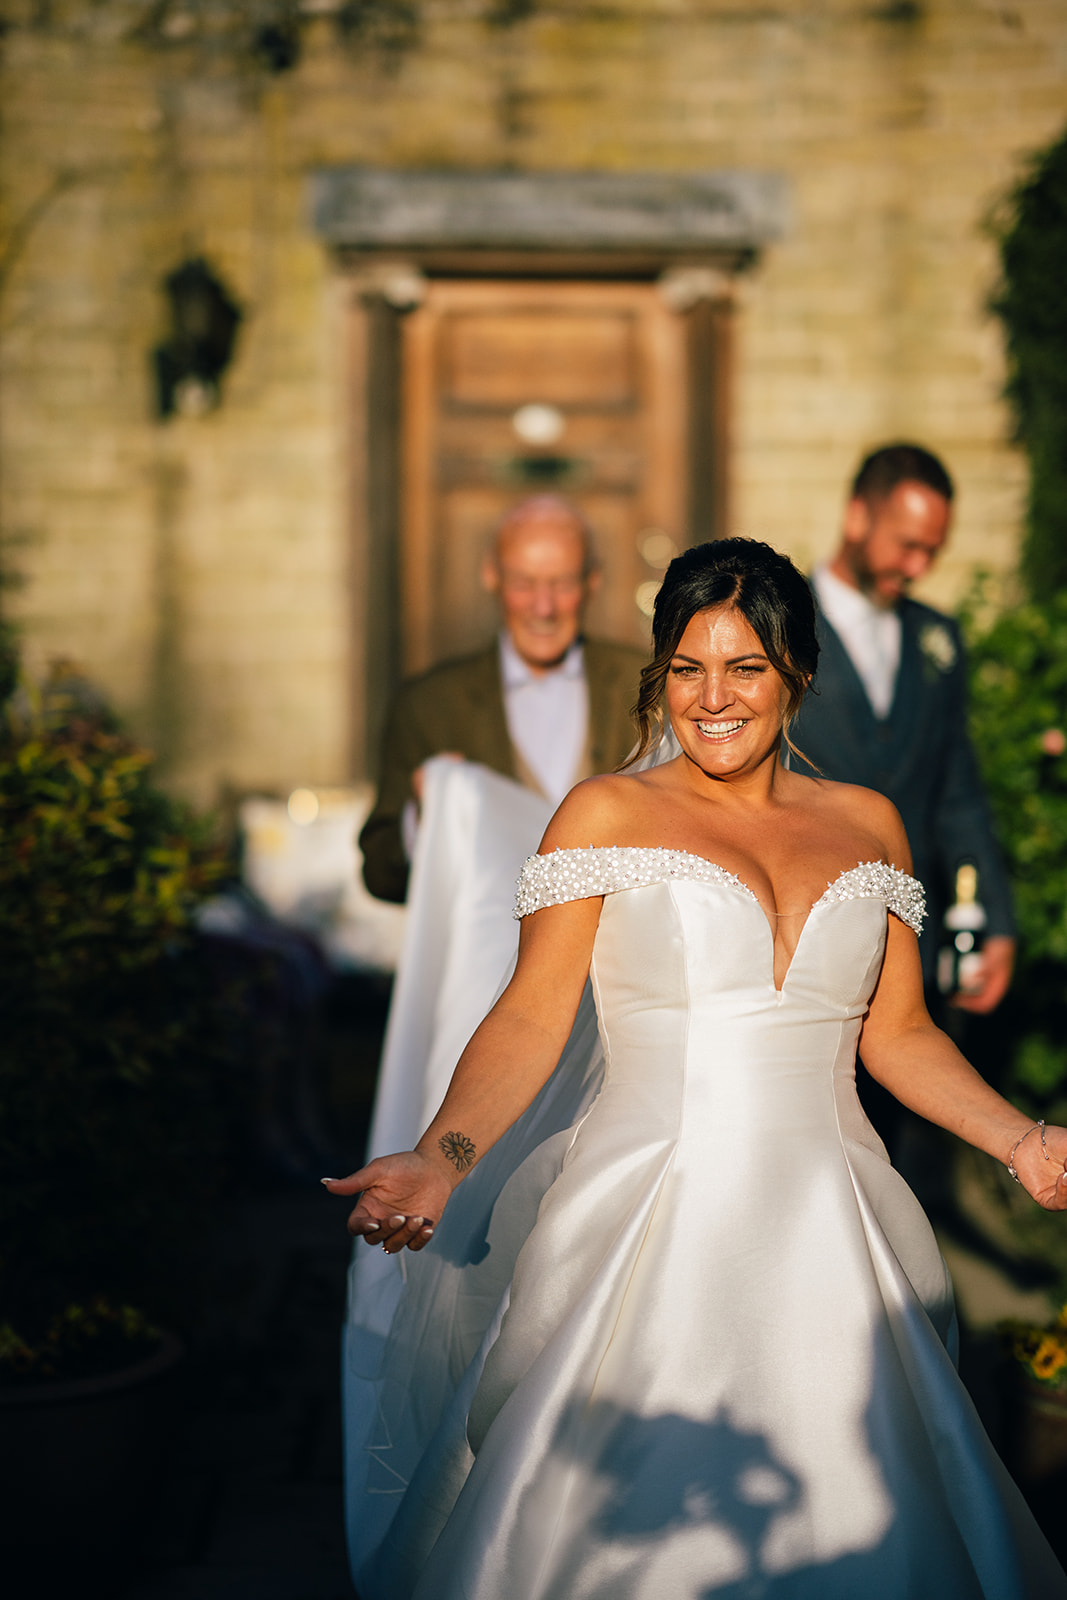 Wedding photographs at the Coniston Hotel